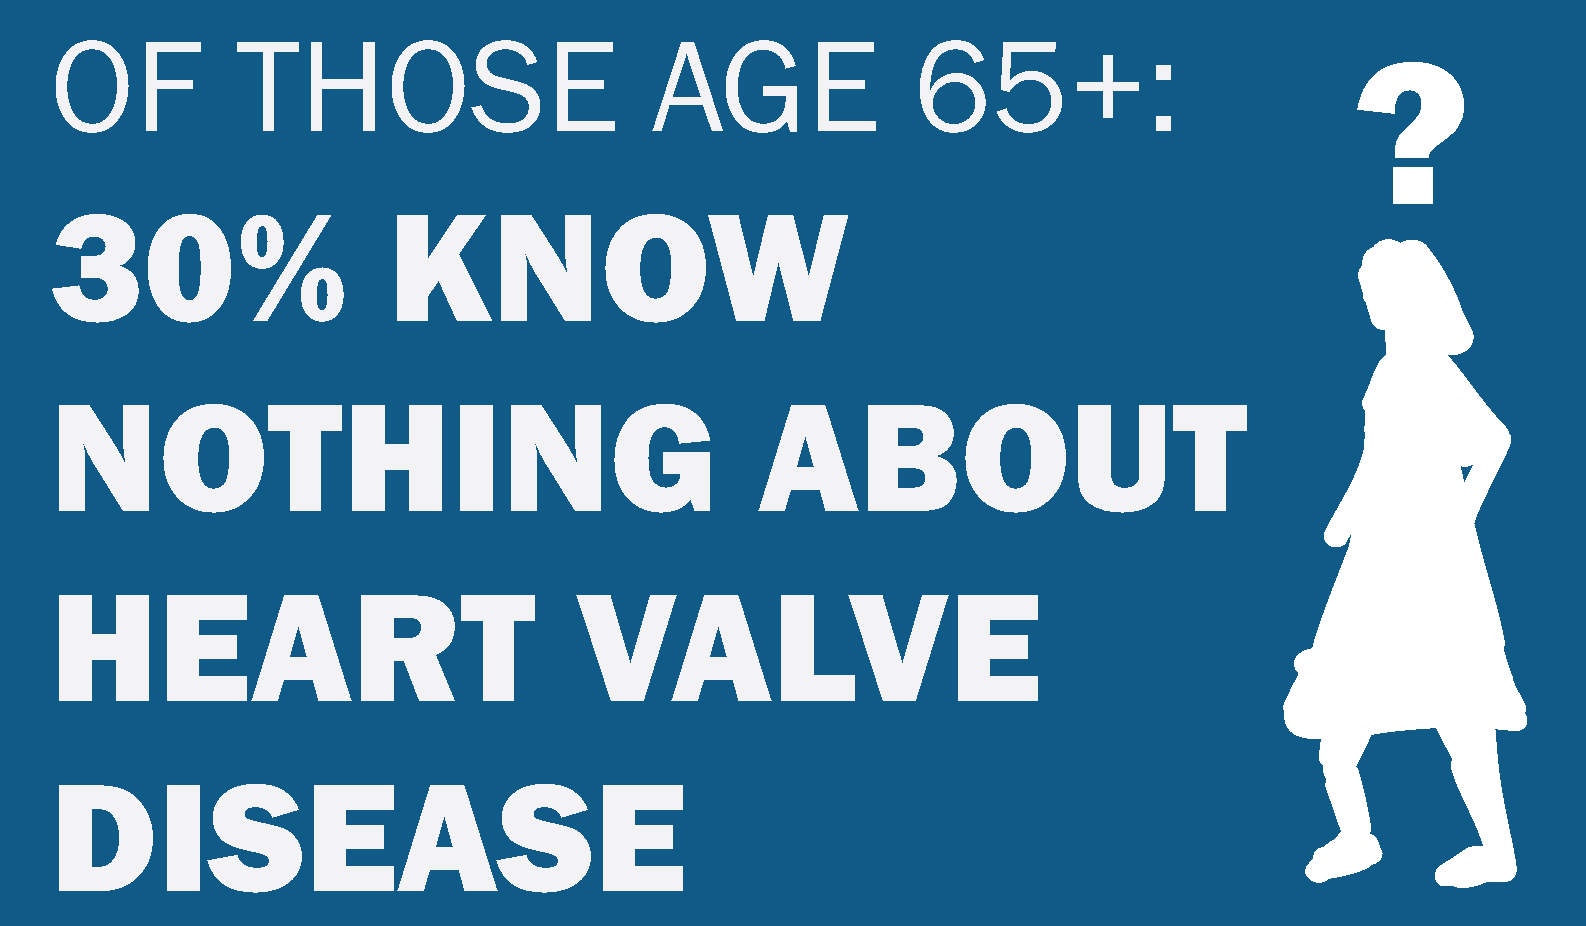 Infographic showing low awareness of heart valve disease in people over 65.